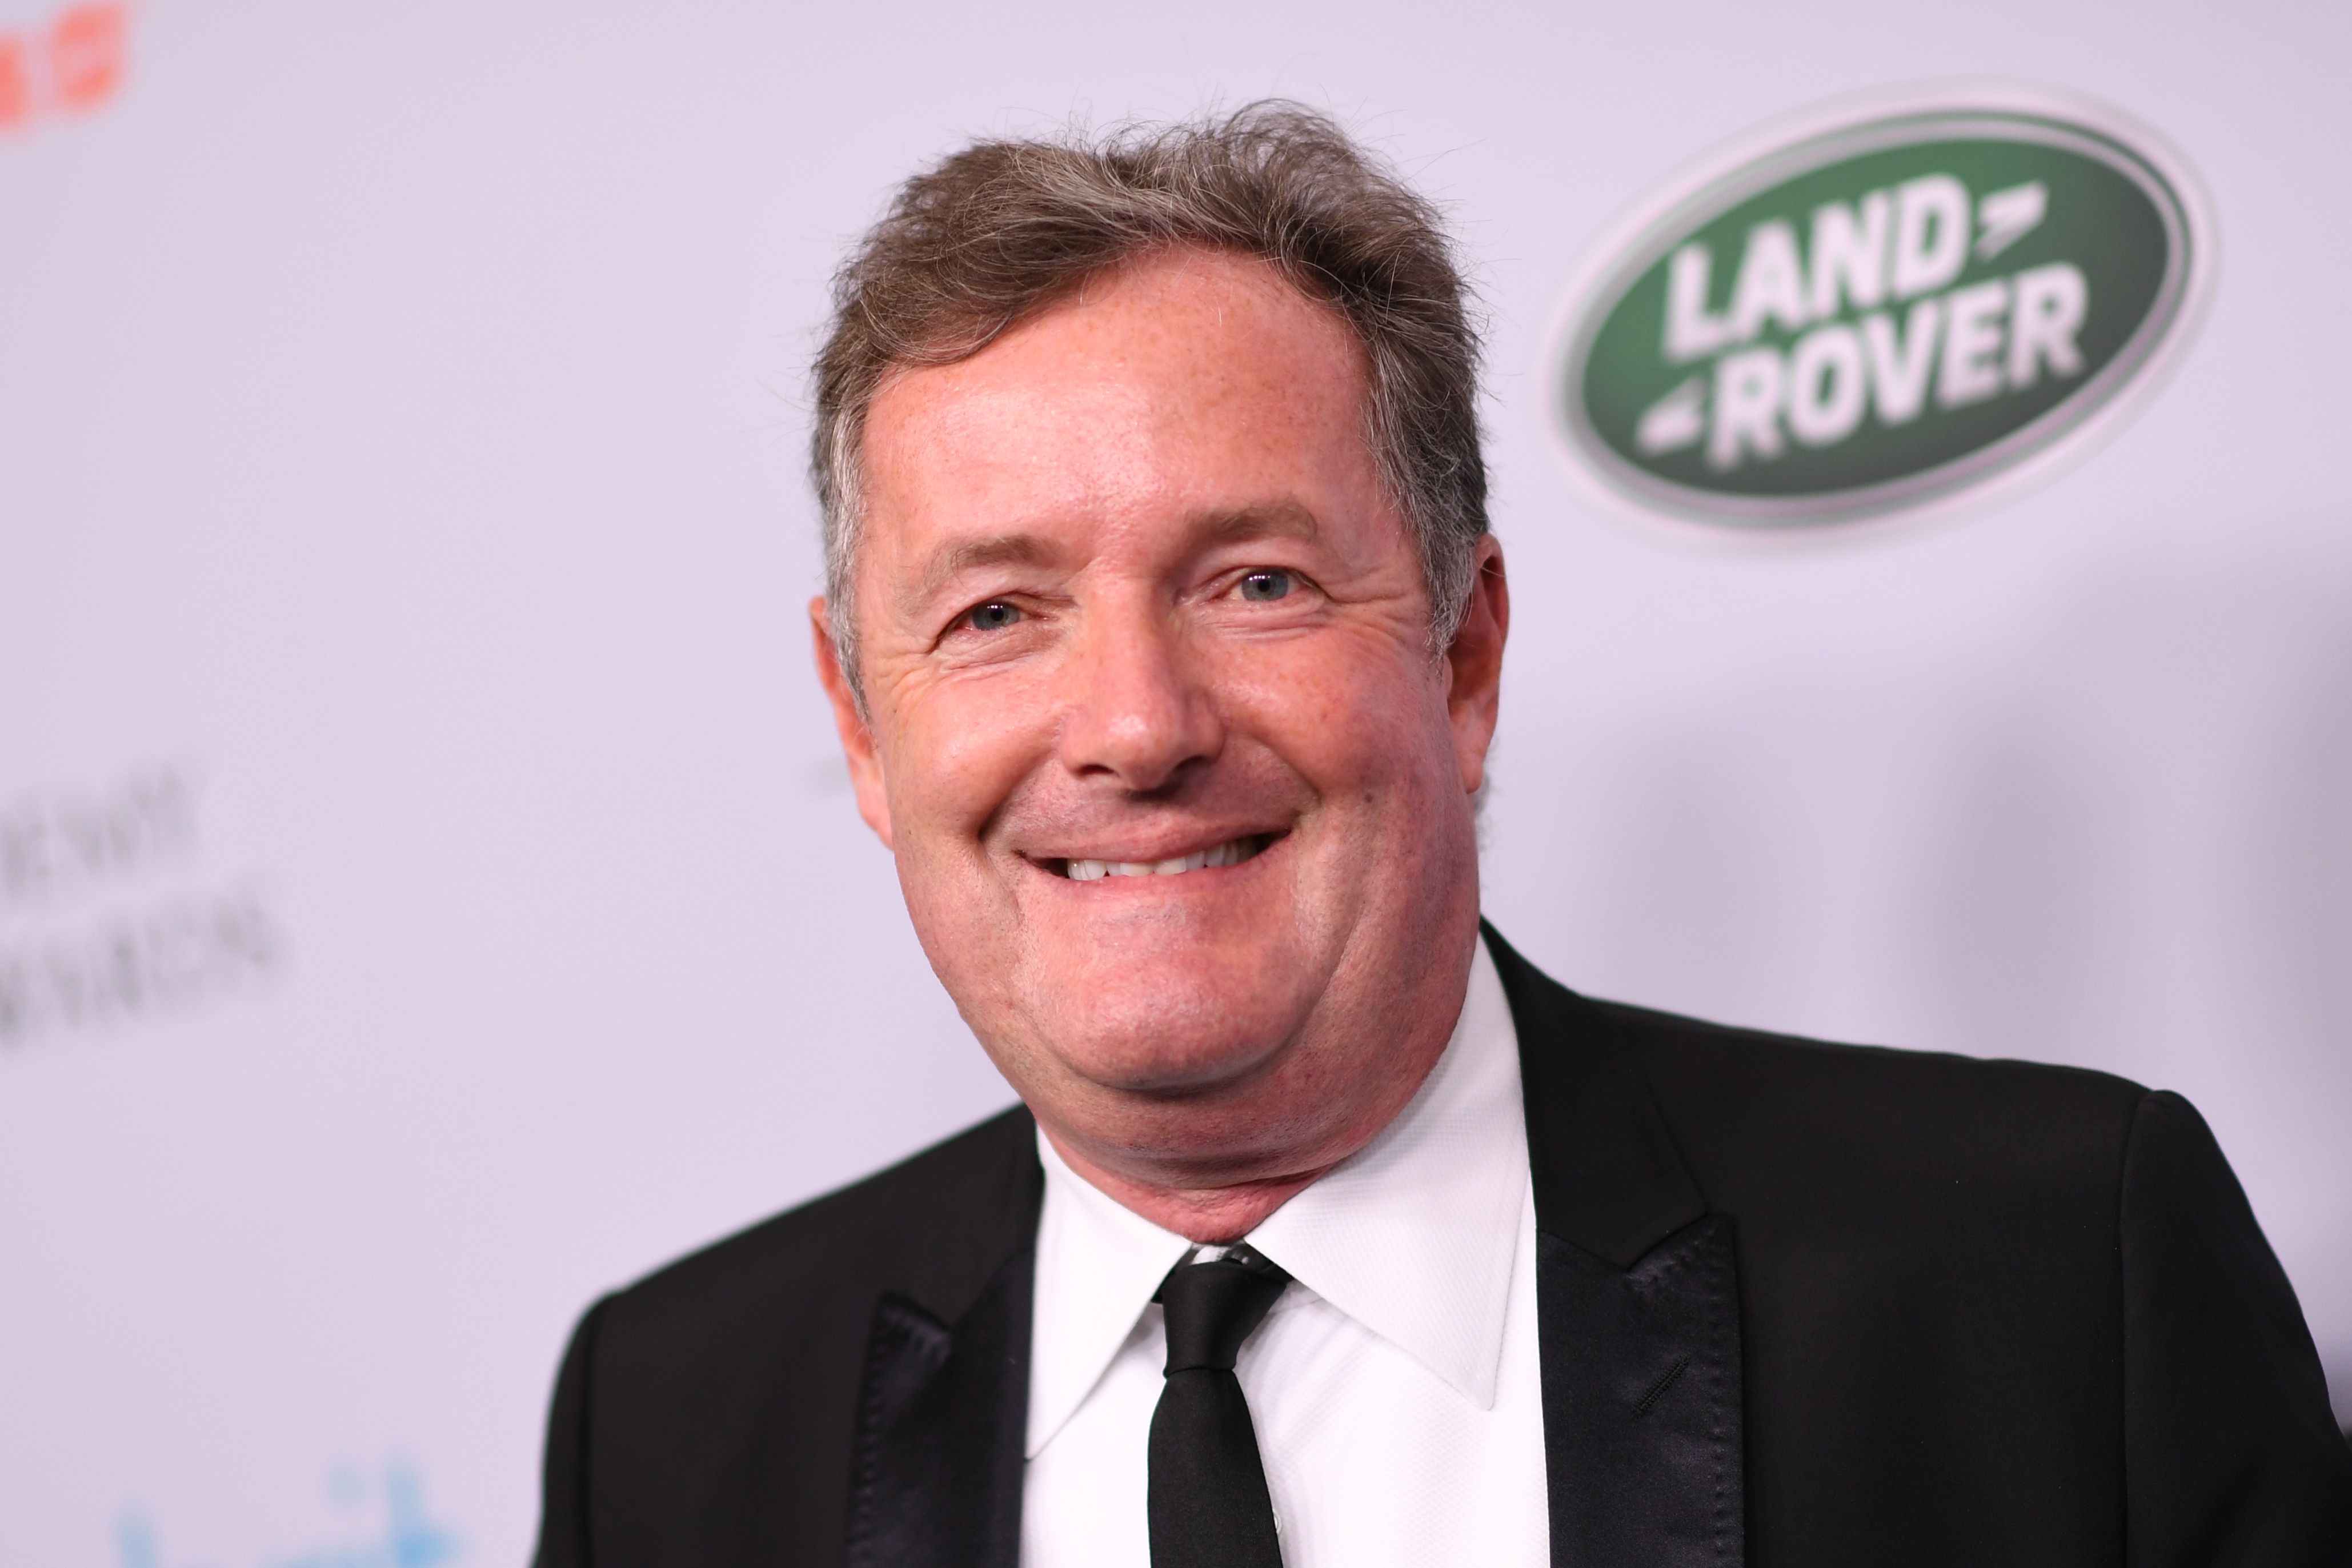 British journalist Piers Morgan arrives for the 2019 British Academy Britannia (BAFTA) awards at the Beverly Hilton hotel in Beverly Hills wearing a black suit and tie